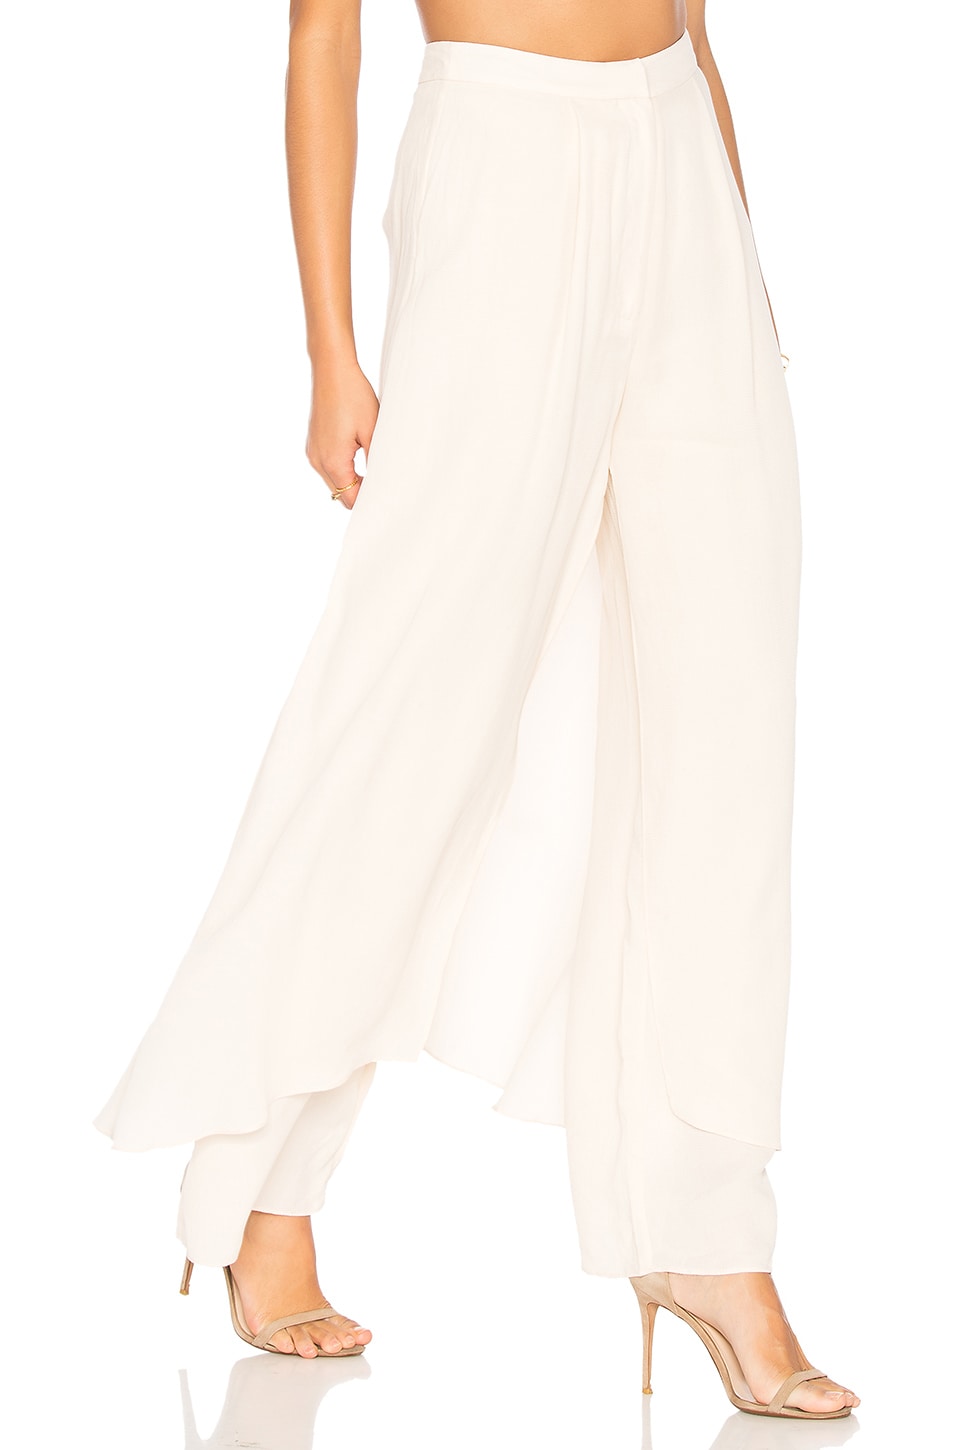 C/MEO Step Aside Pant in Ivory | REVOLVE